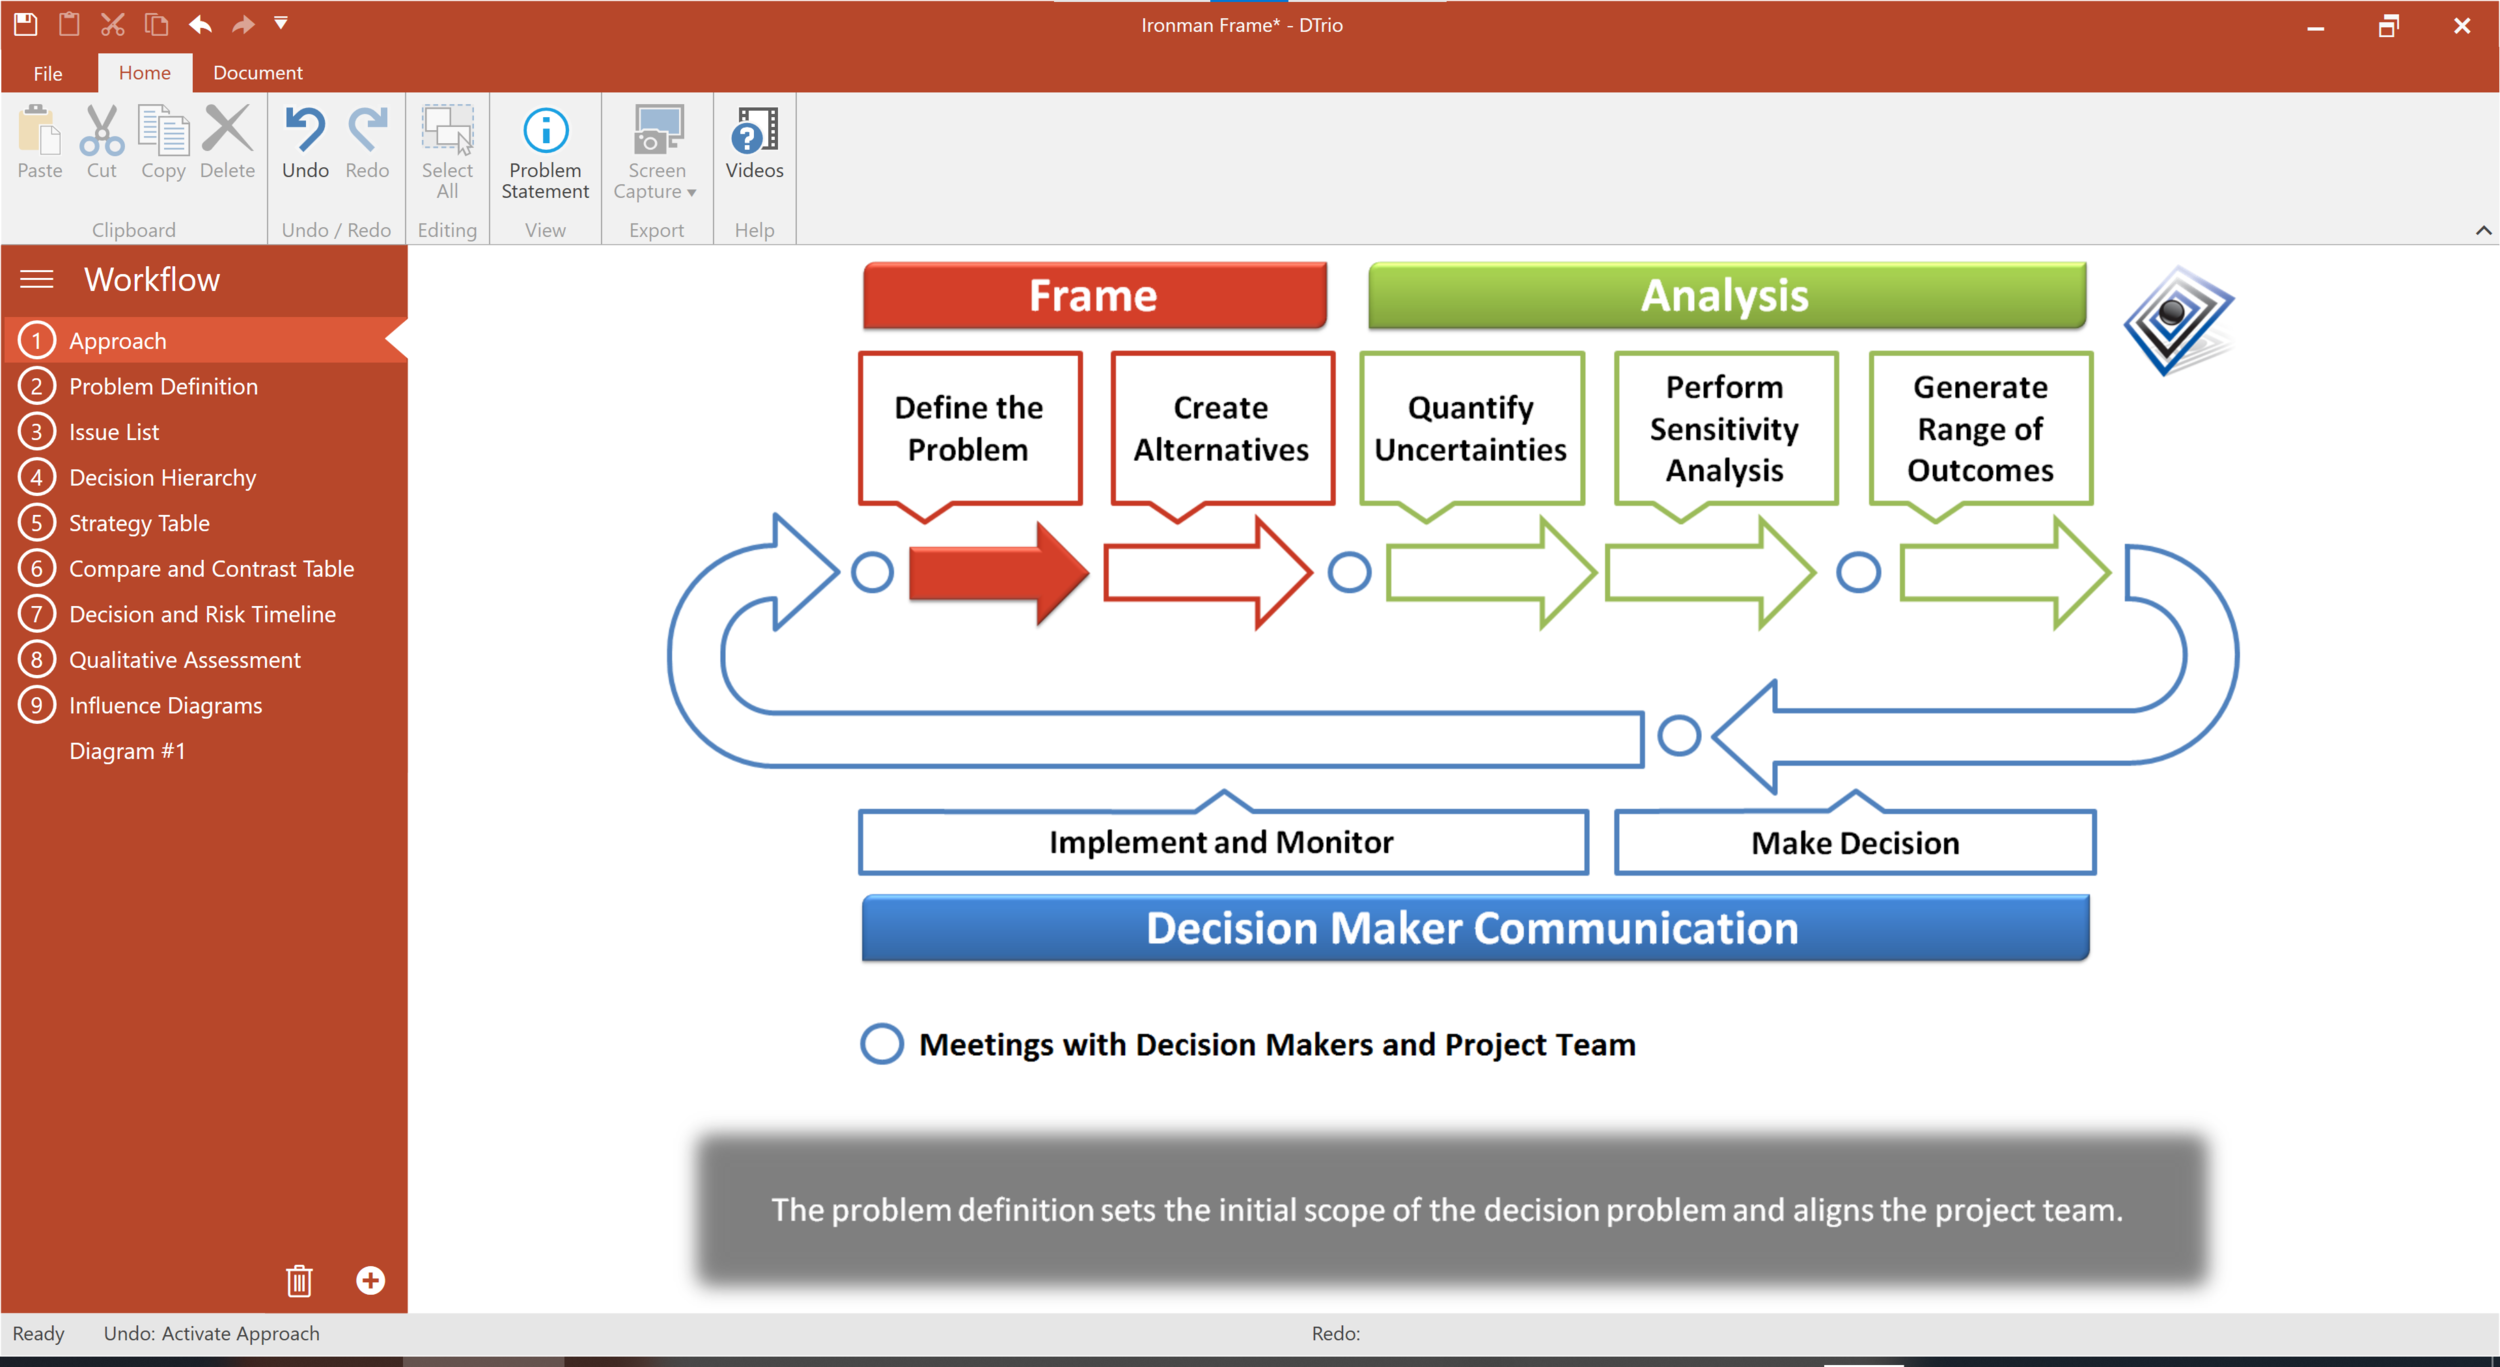   The guided workflow can be customized to be a perfect match for your decision problem  